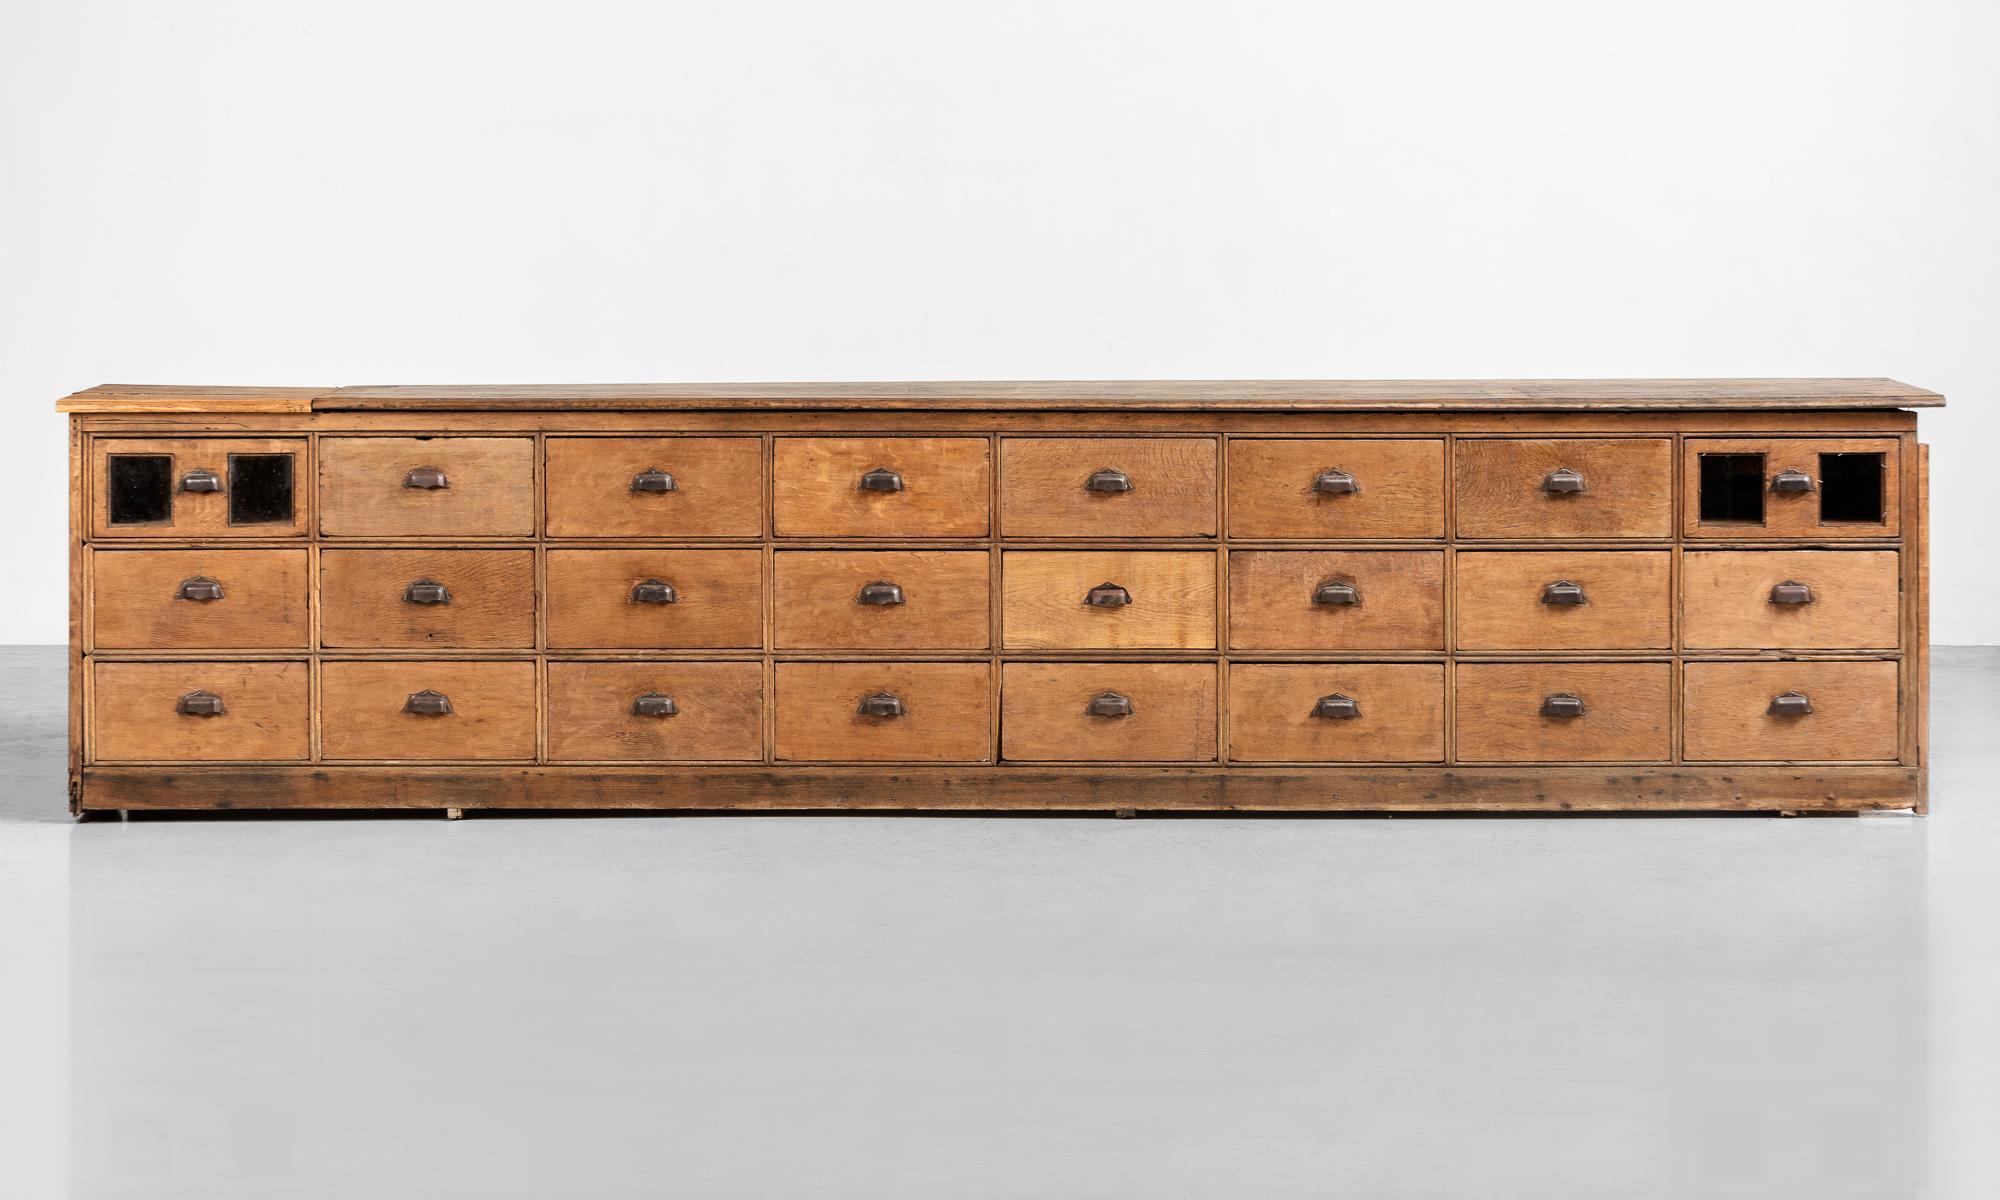 Oak Bank of Drawers, England, circa 1900

Massive form with beautiful patina and solid oak construction.